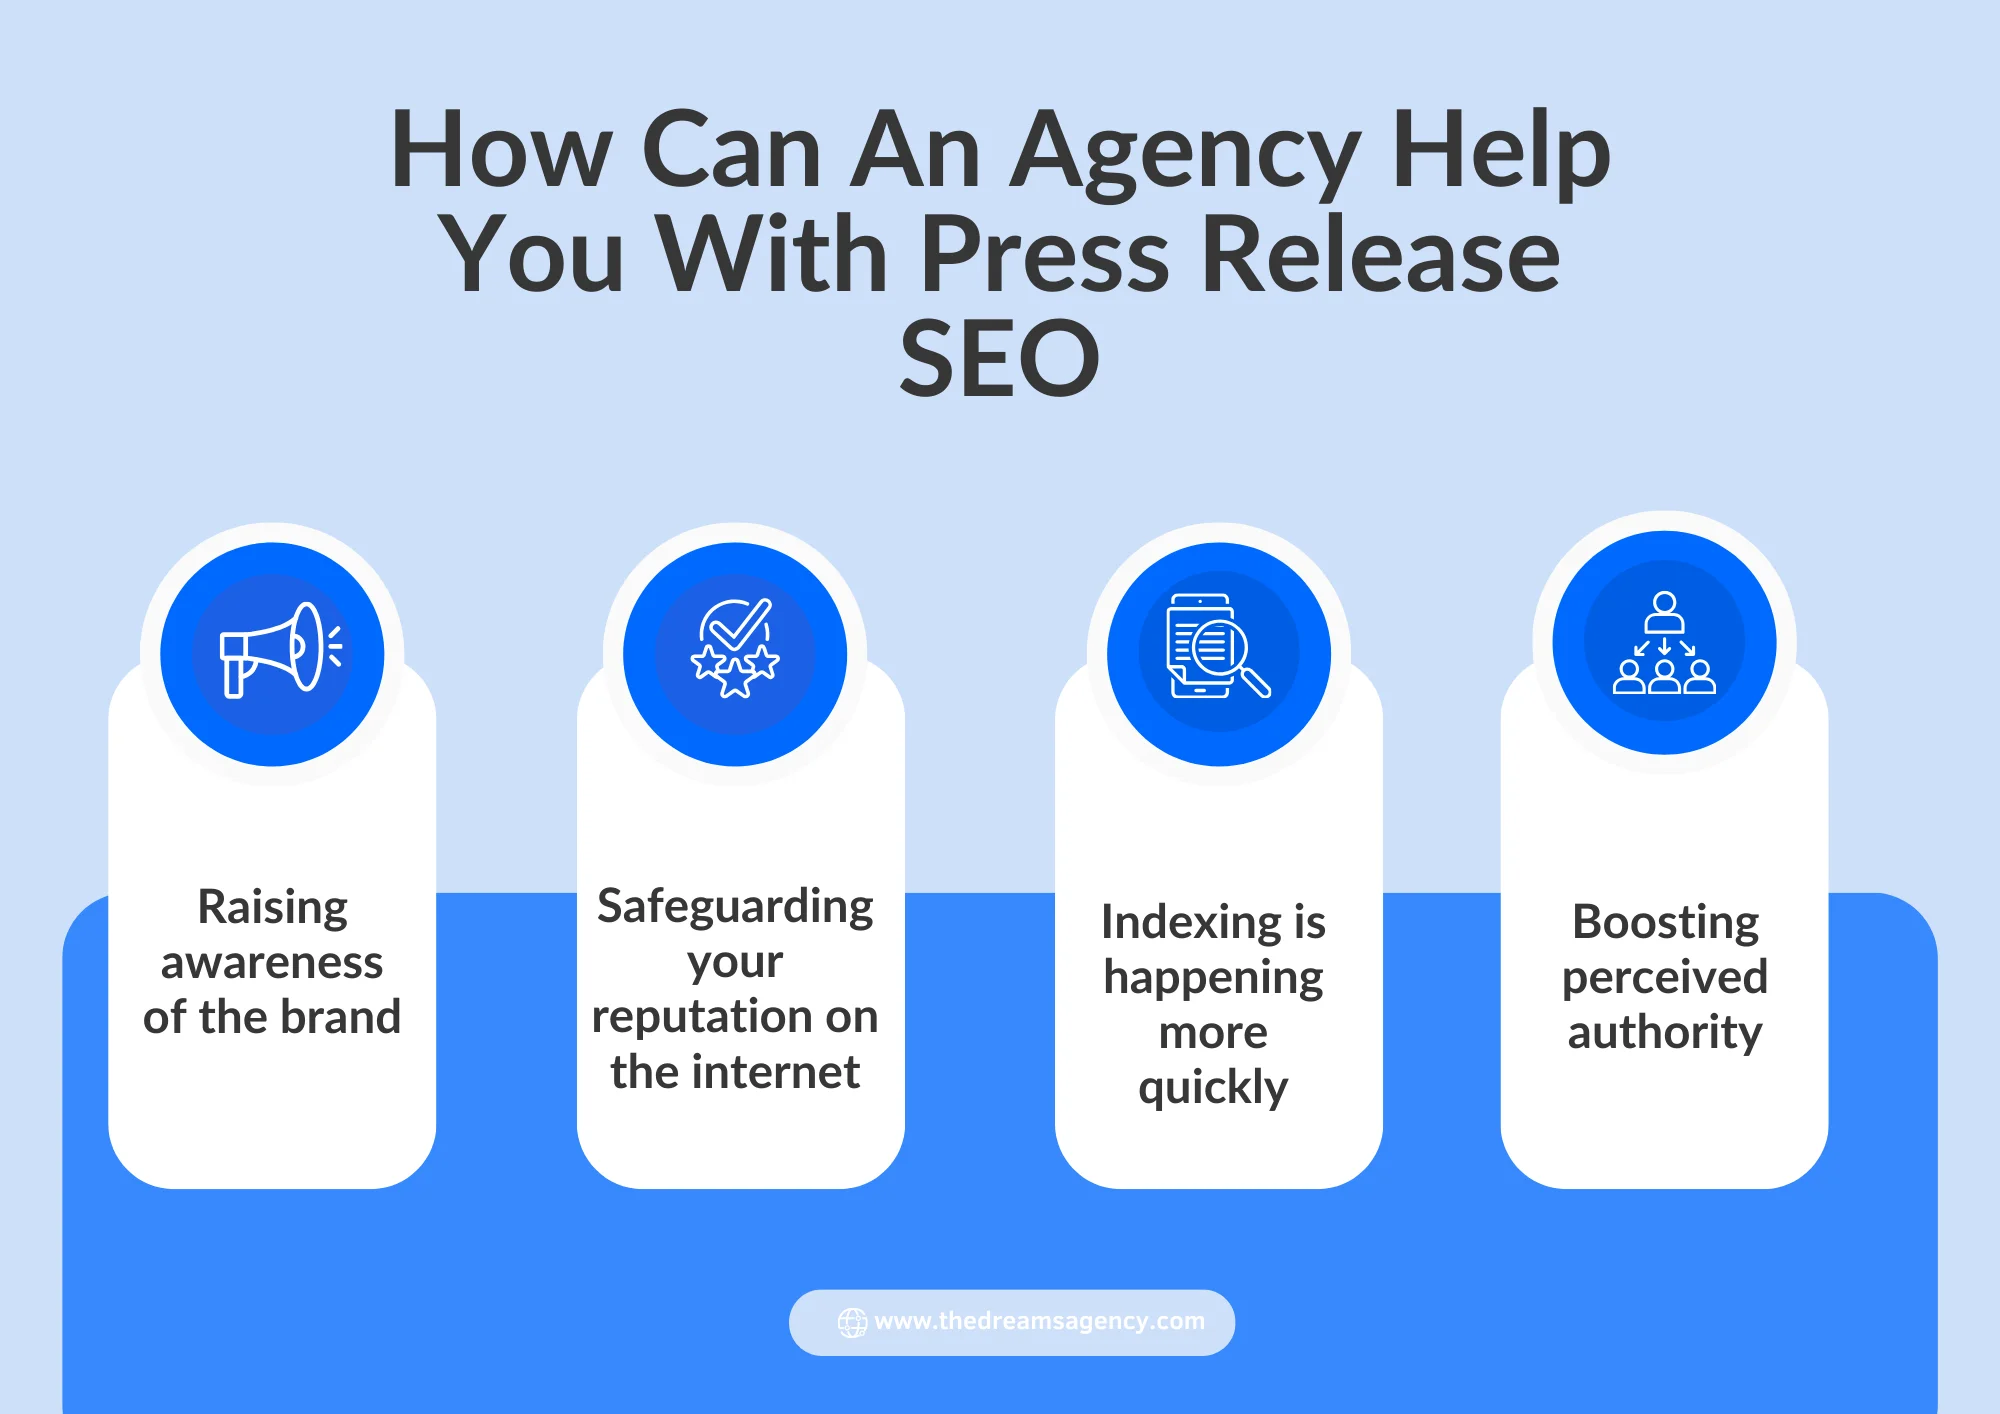 An infographic on how an agency can help with press release seo